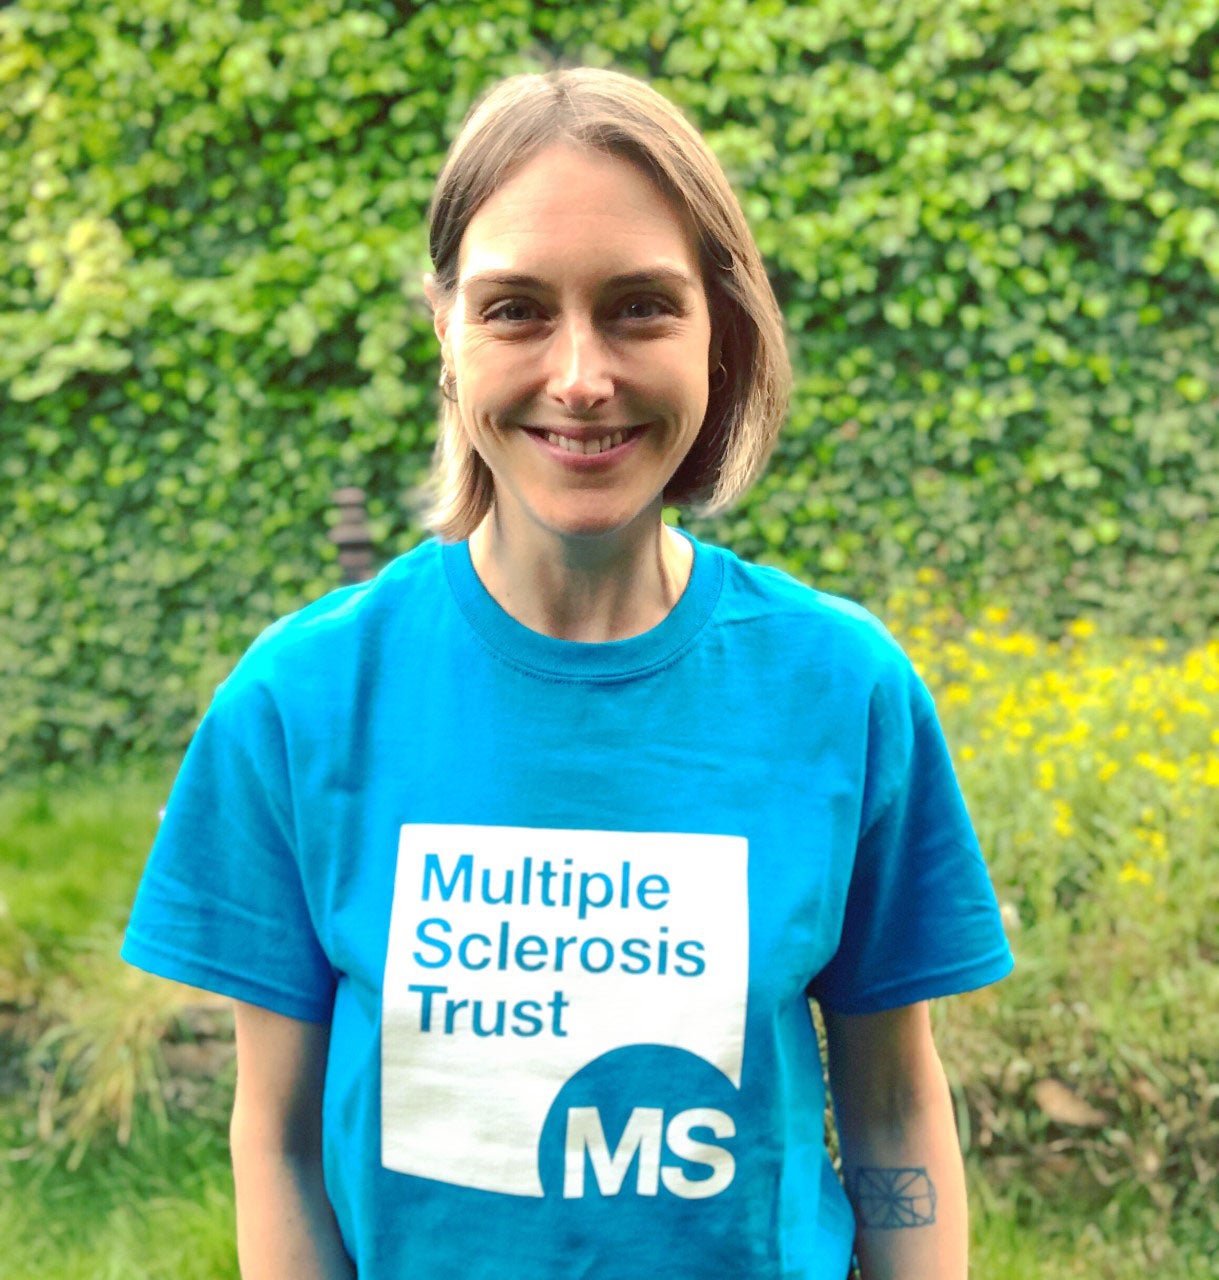 Goddard was diagnosed with MS last year